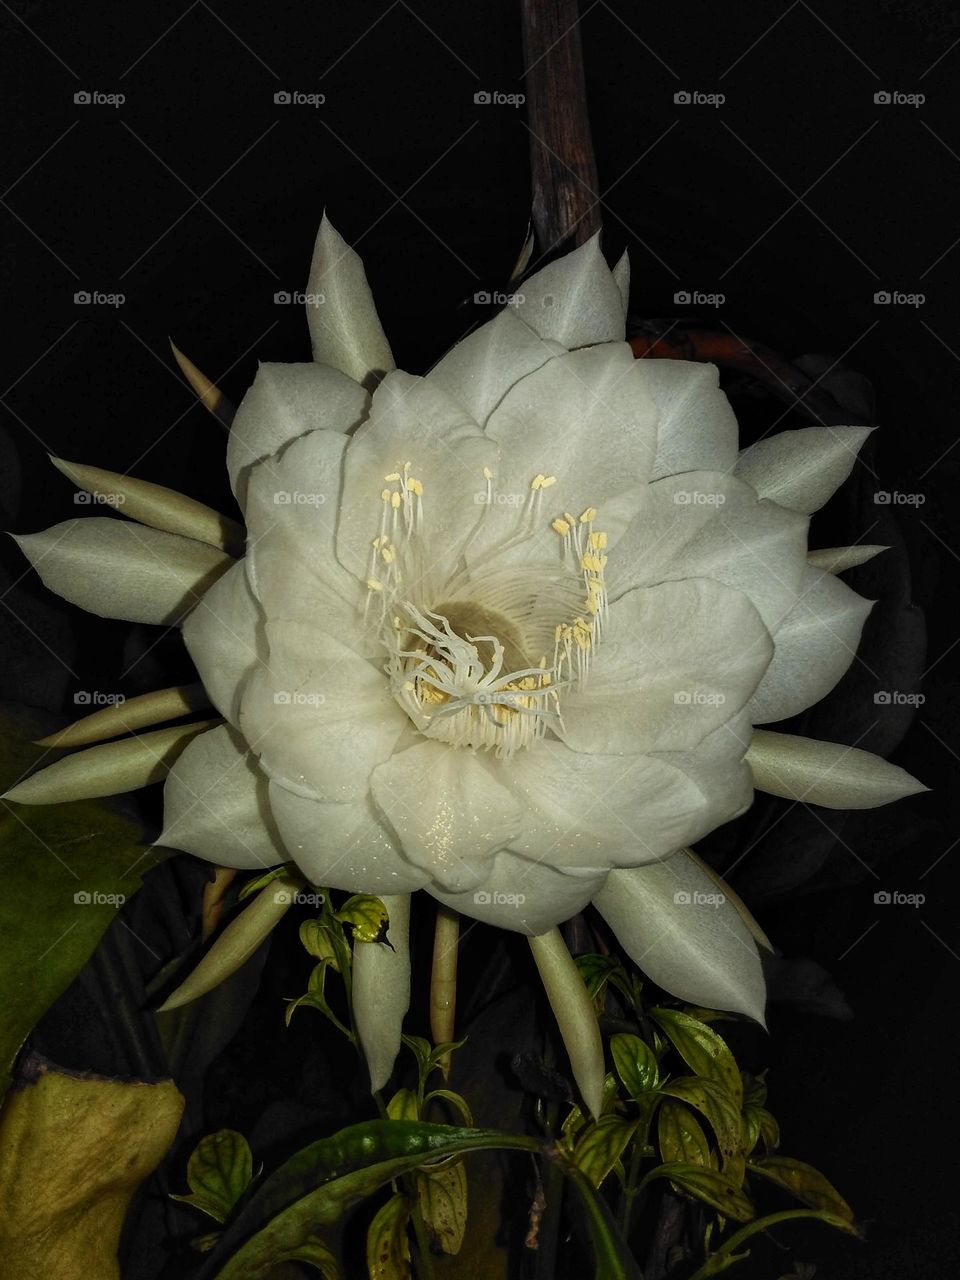 Epiphyllum anguliger, in Indonesia called Wijaya Kusuma, the flowers are big white and bloom only overnight